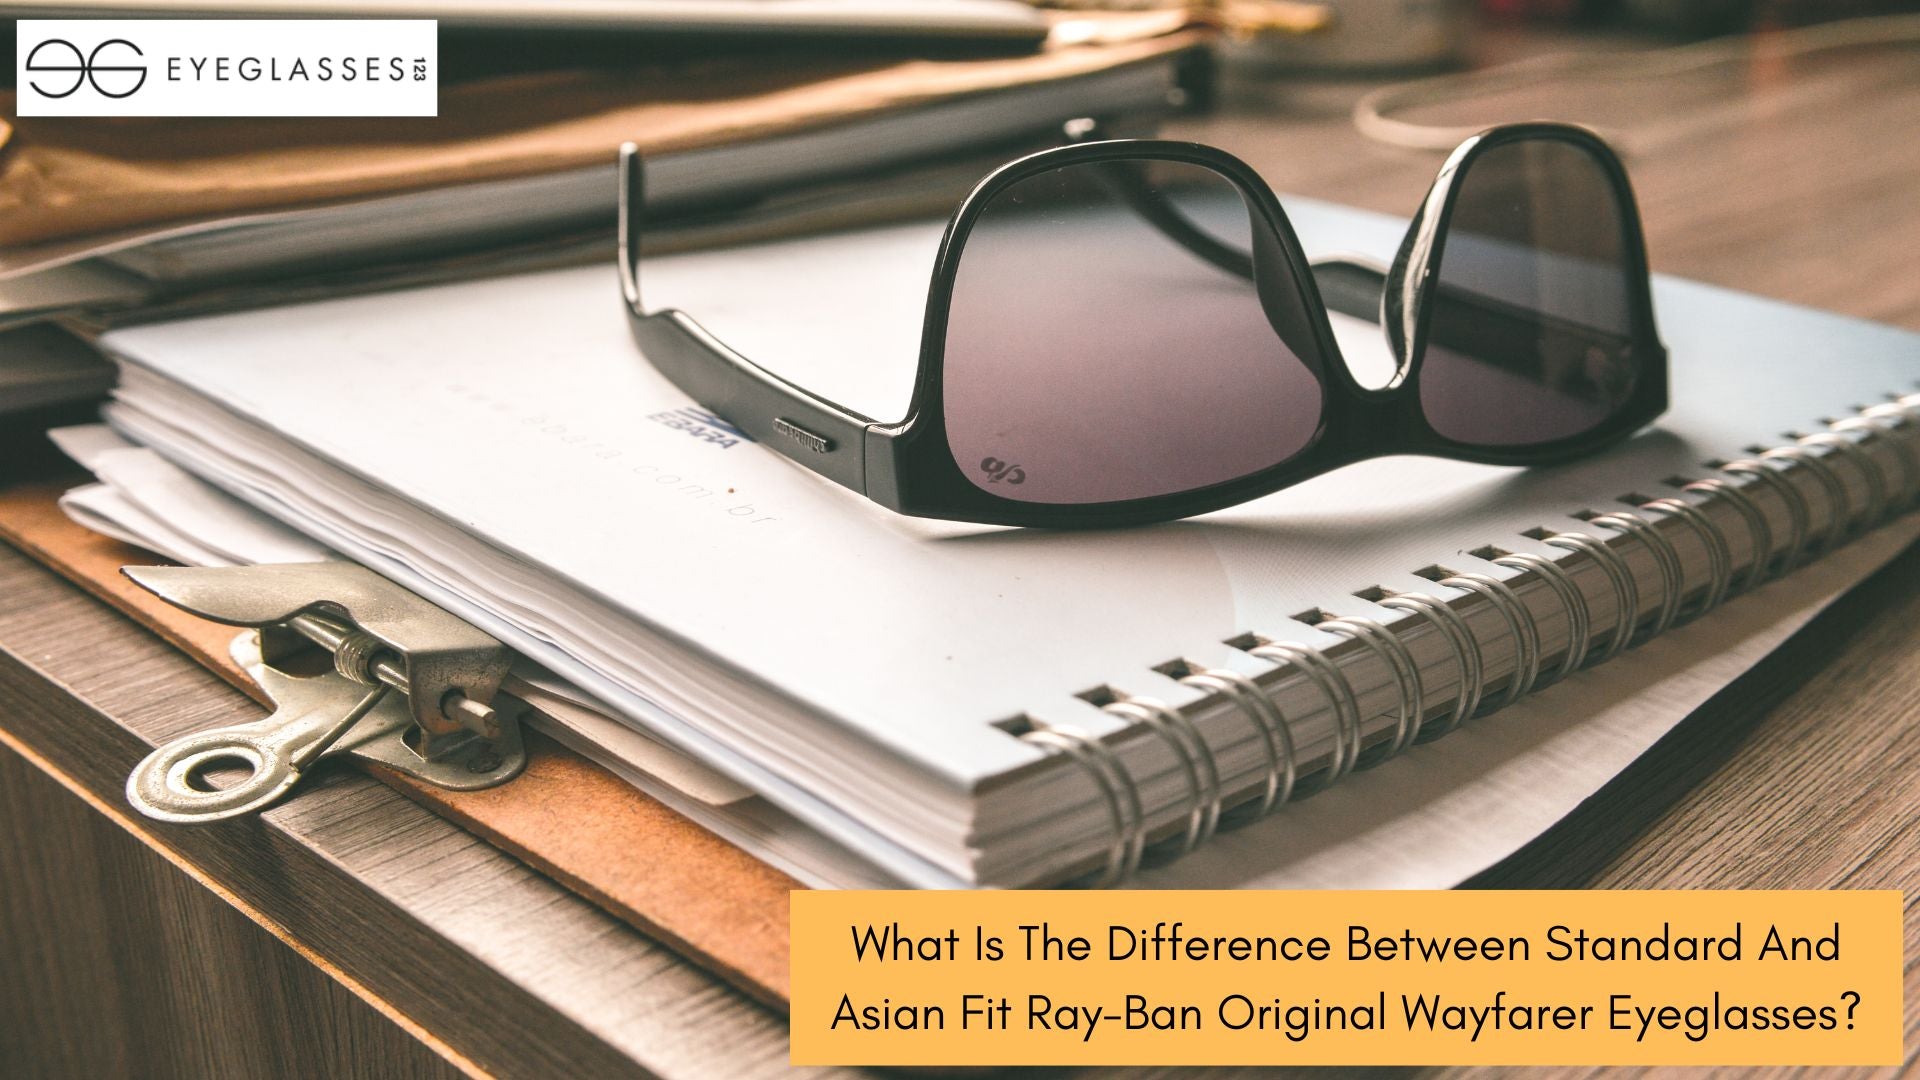 What Is The Difference Between Standard And Asian Fit Ray-Ban Original Wayfarer Eyeglasses?